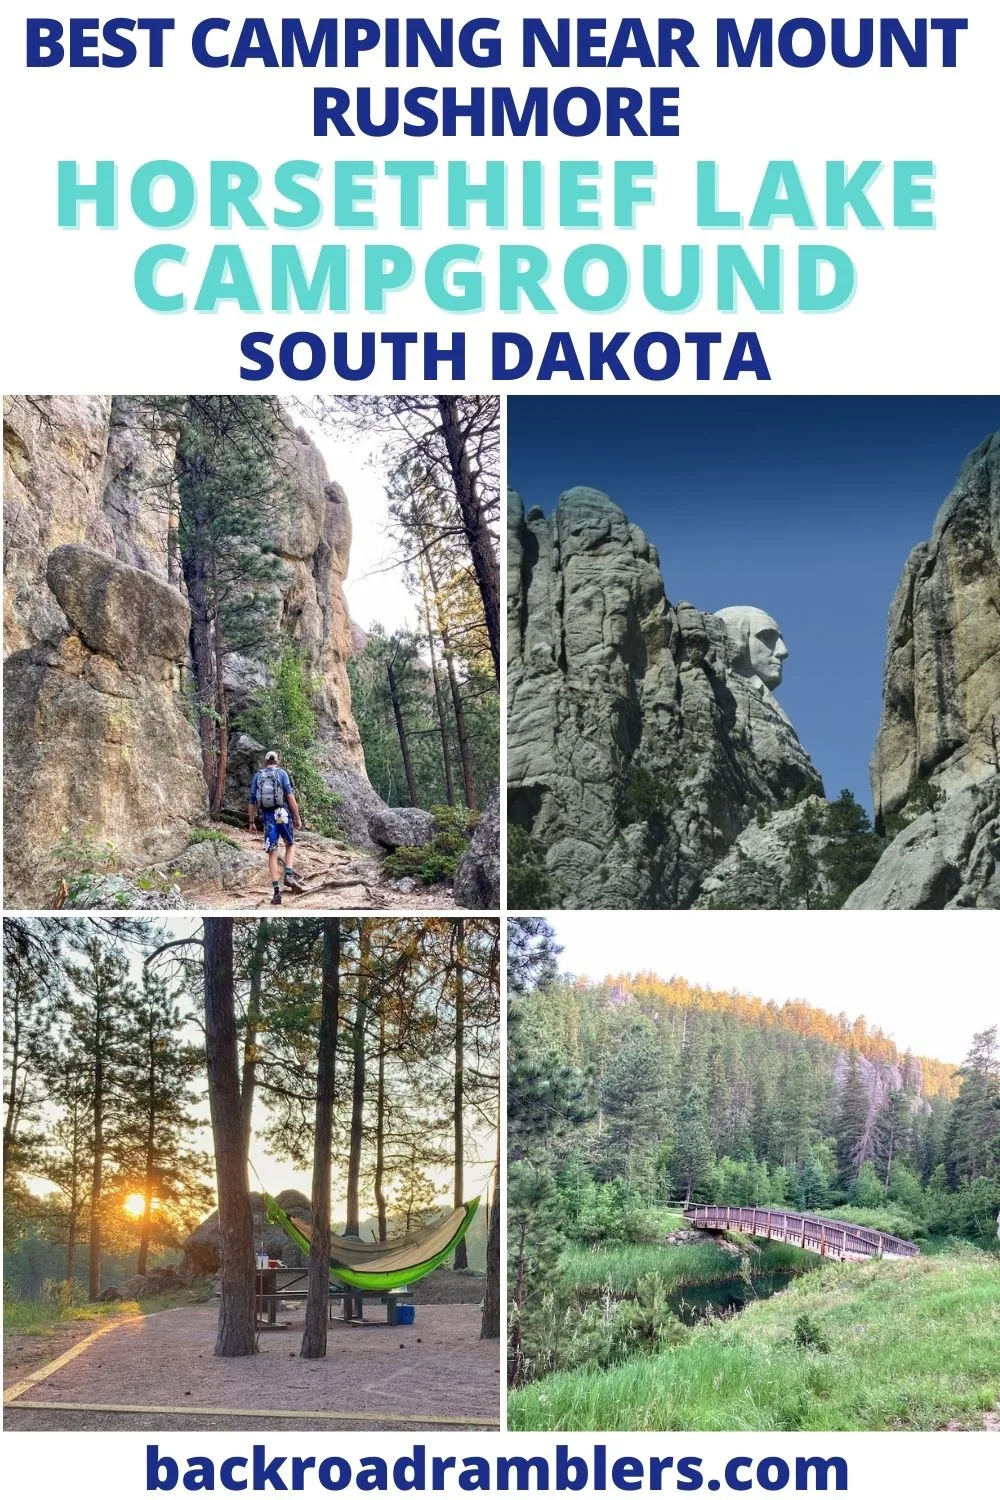 A collage of photos featuring campgrounds near Mount Rushmore in South Dakota.